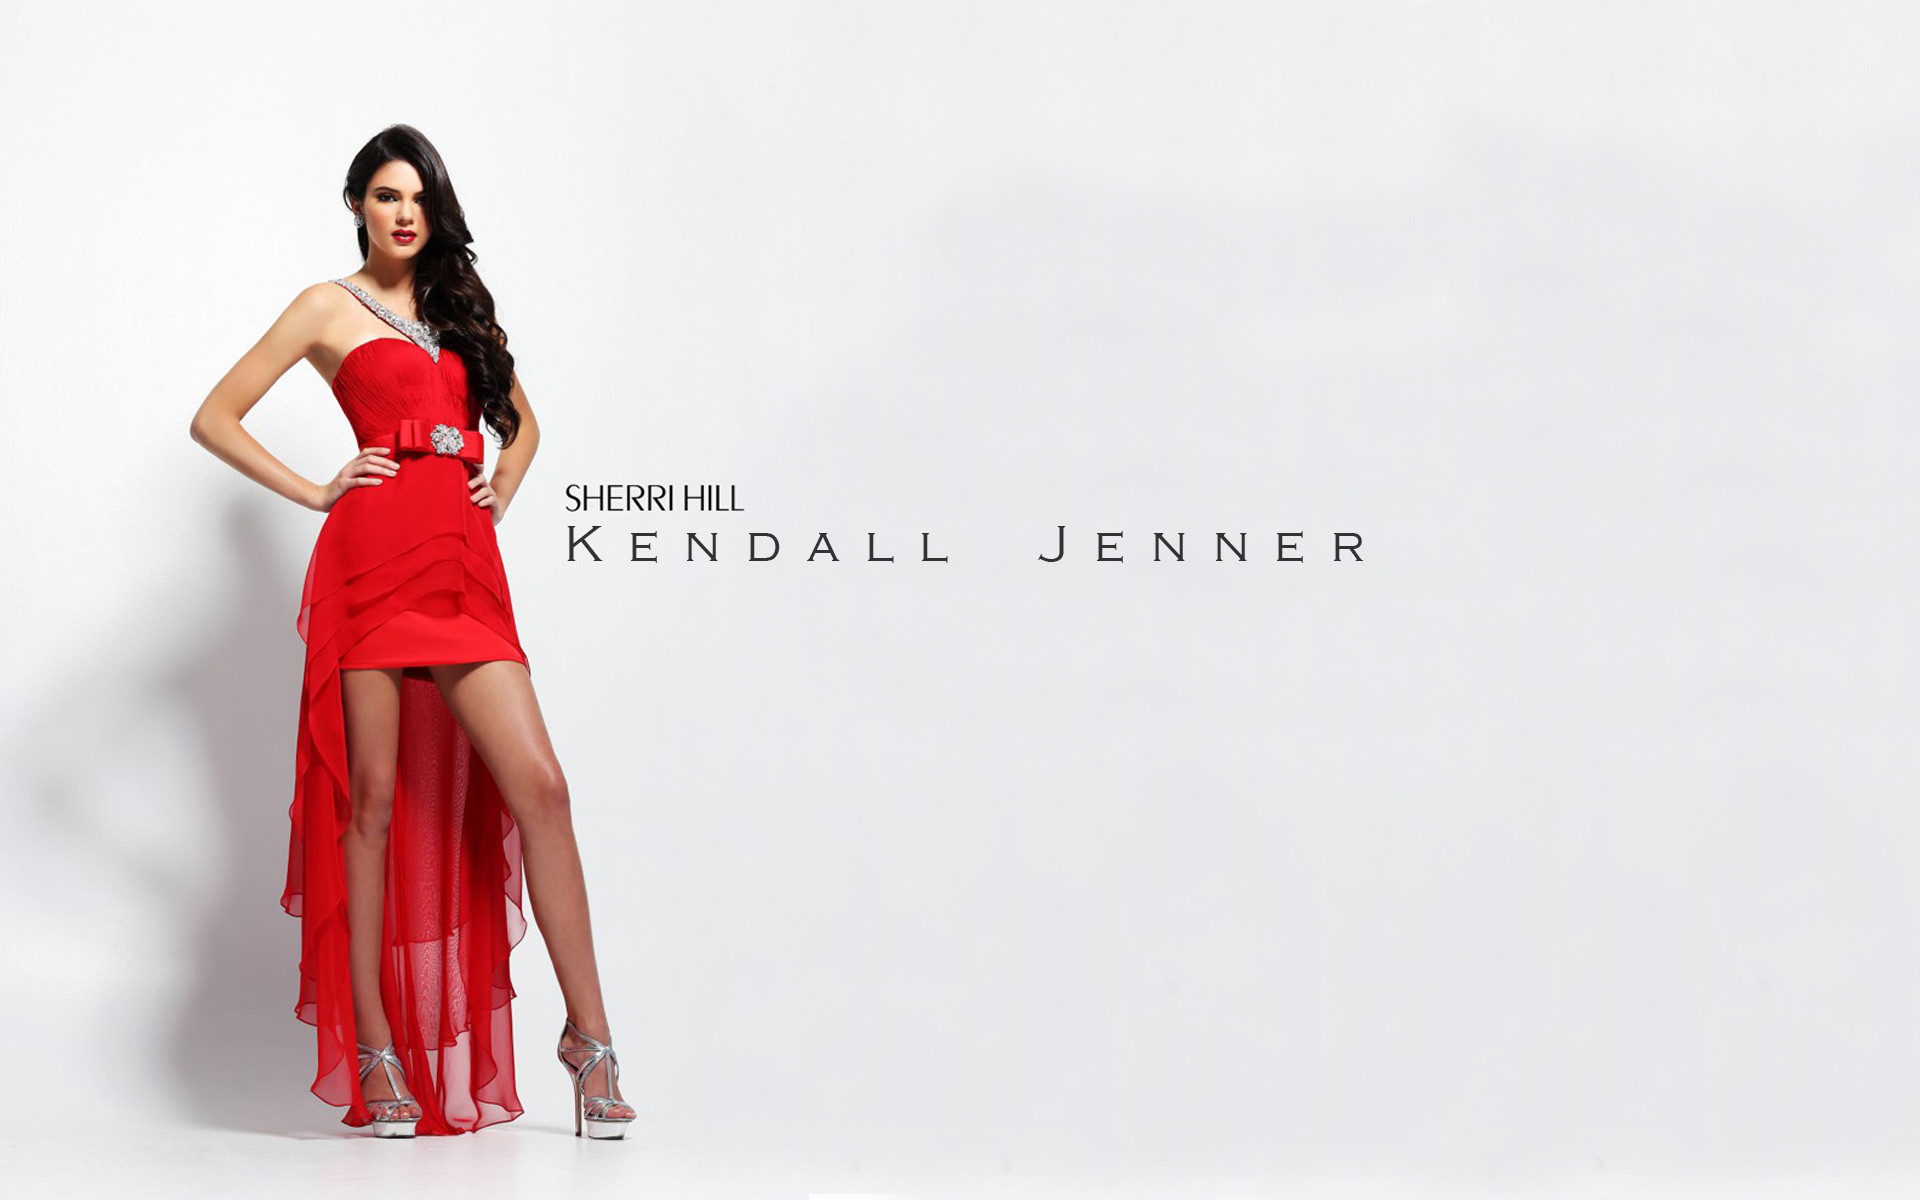 Kendall Jenner 2017 Wallpapers